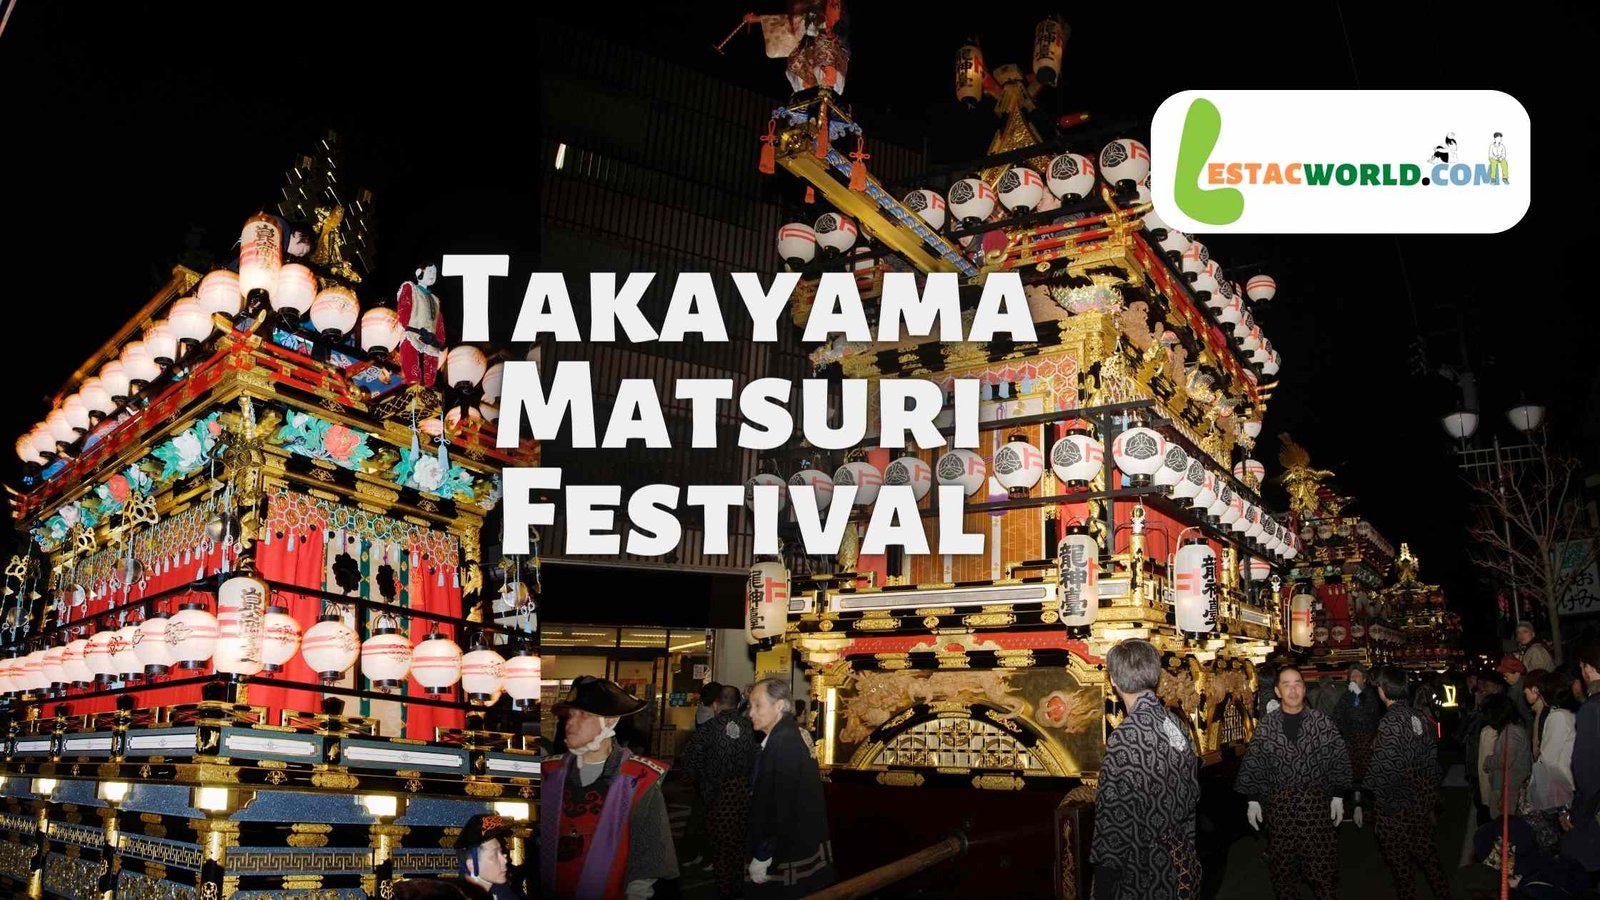 Important to know about Takayama Matsuri Festival in Japan